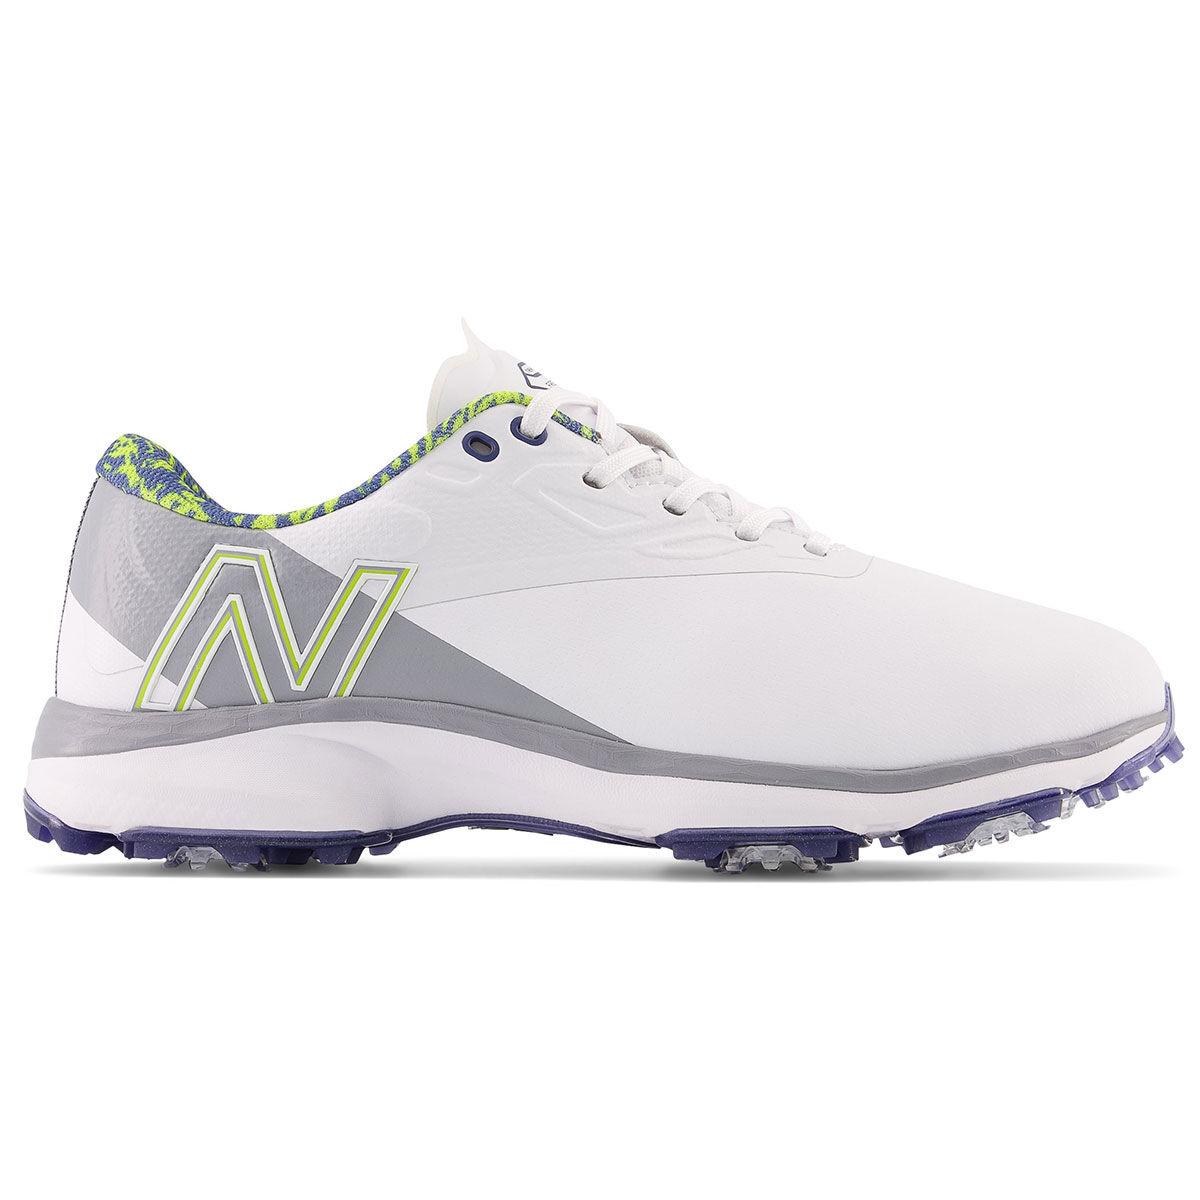 New Balance Men’s White and Grey Lightweight Fresh Foam X Defender Waterproof Spiked Golf Shoes, Size: 7.5 | American Golf